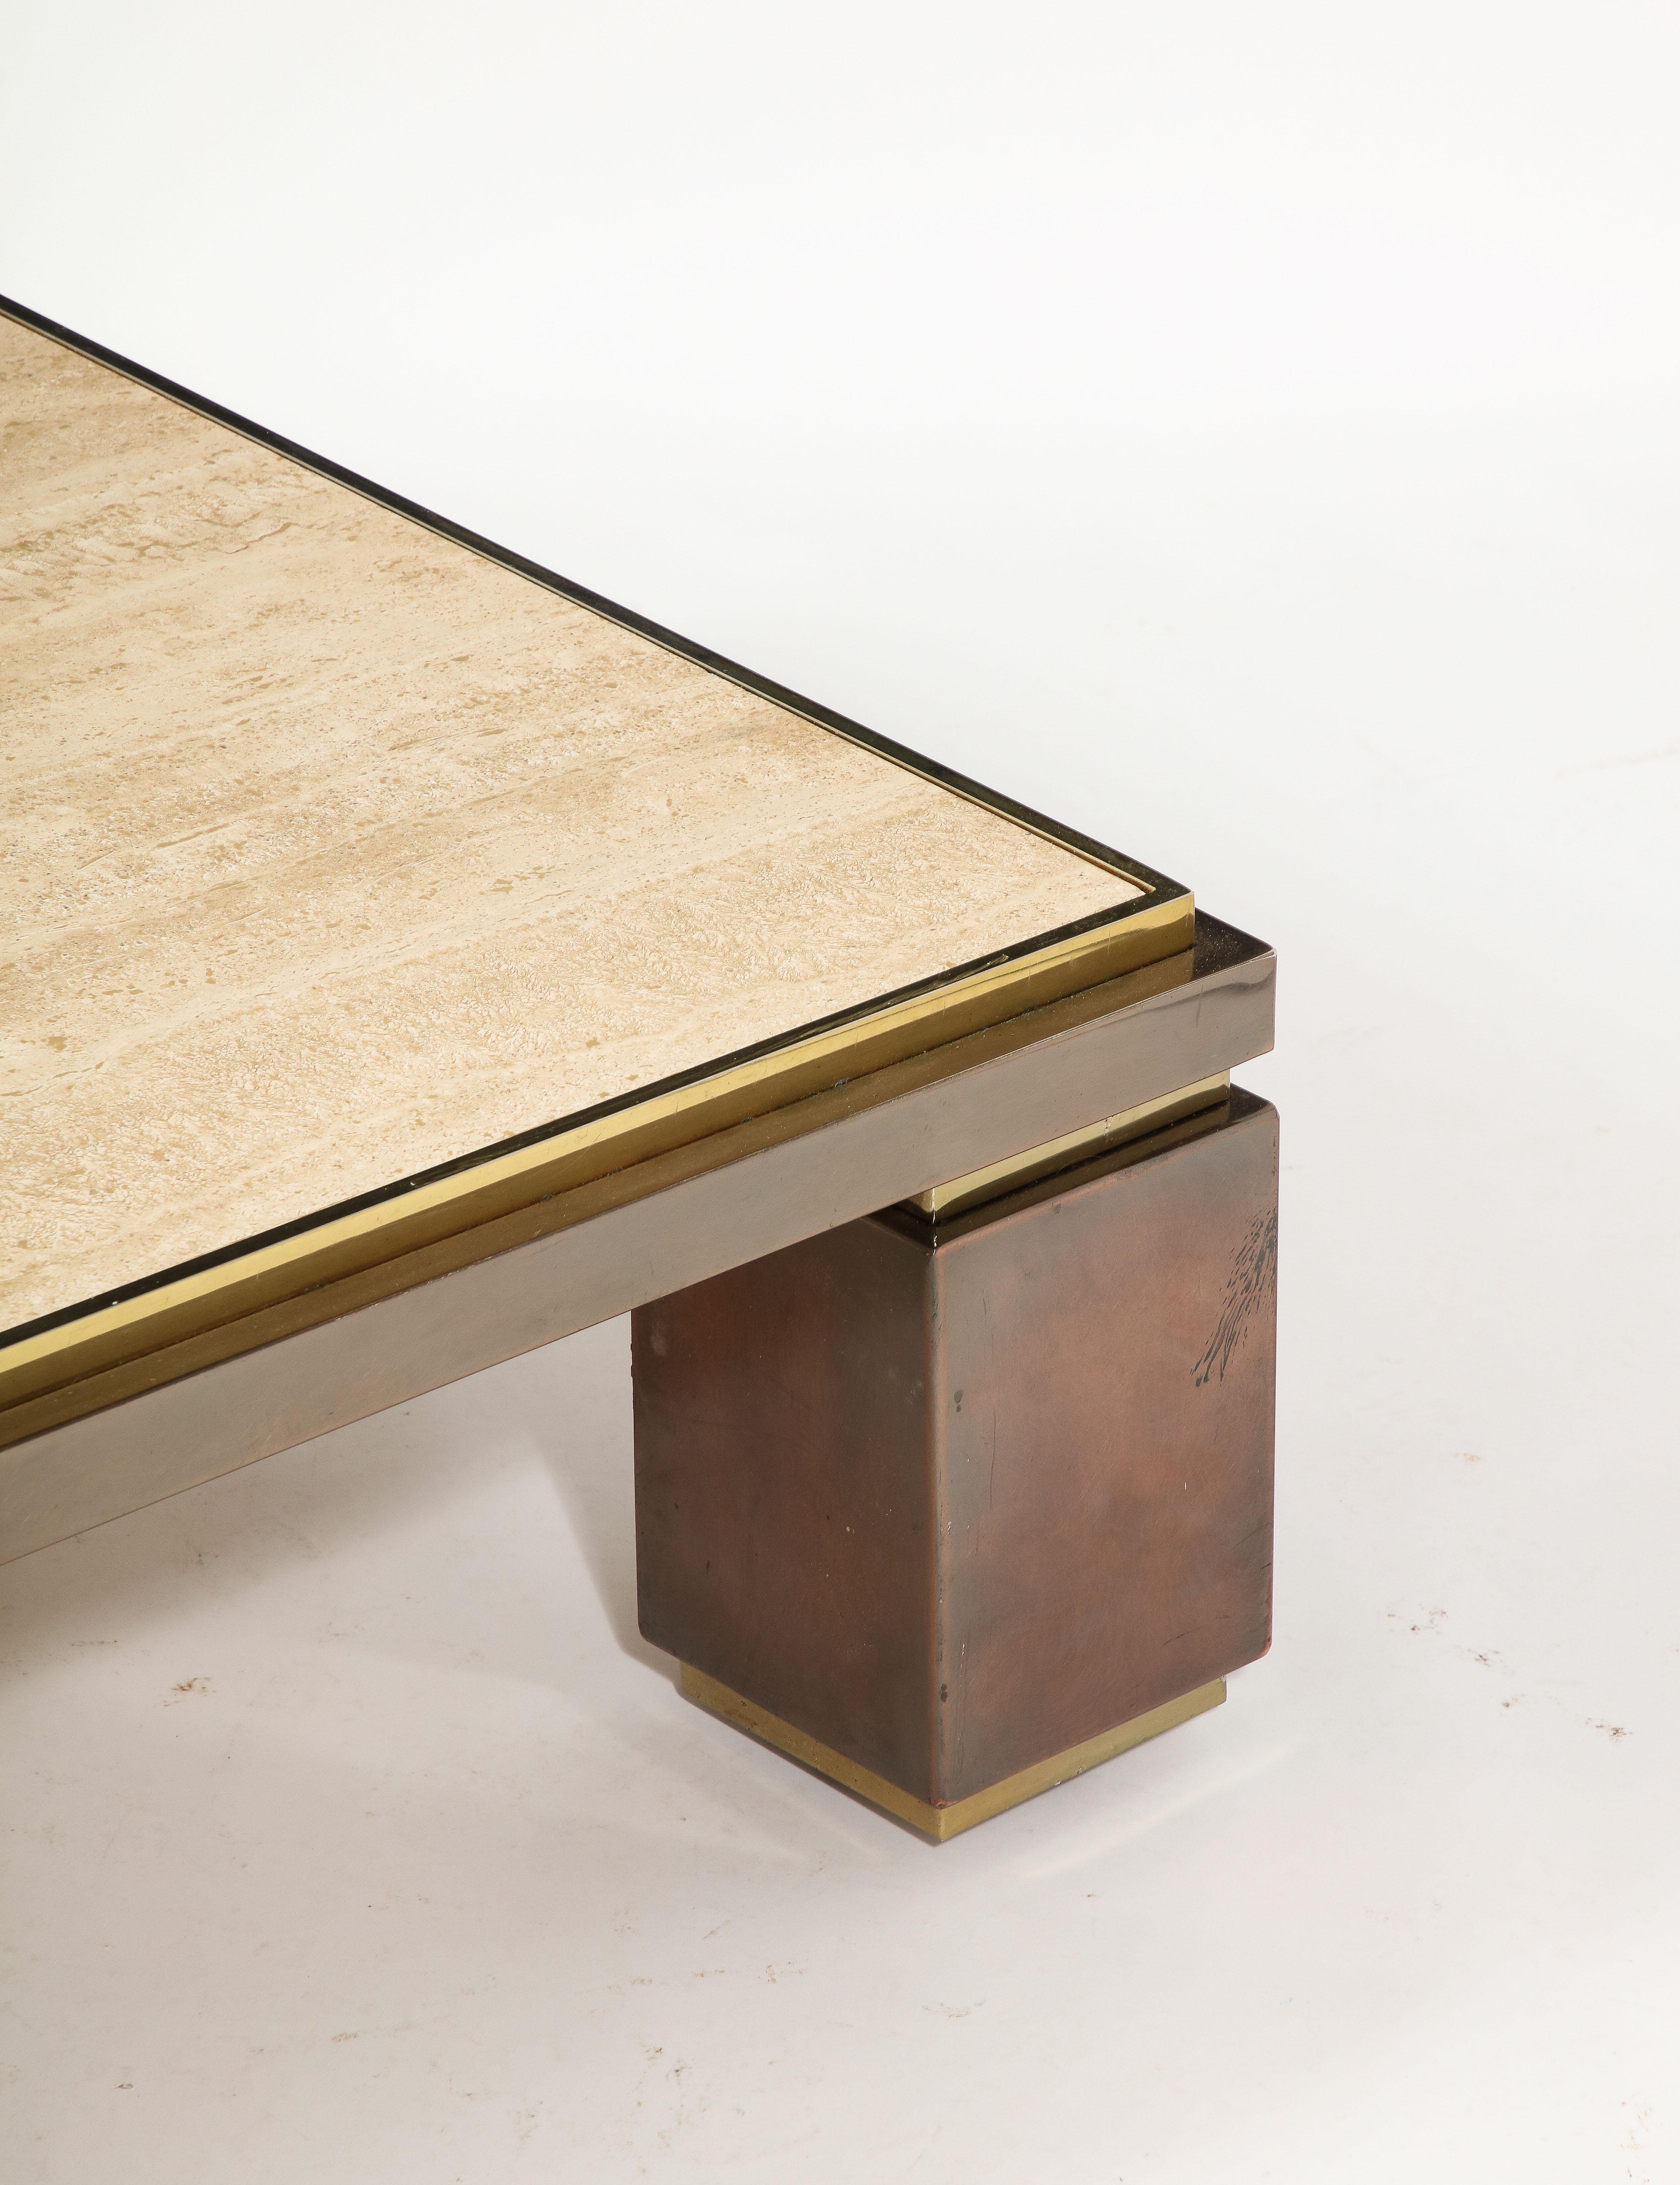 Large Deco Style BelgoChrom Travertine & Brass Coffee Table, Belgium 1960's In Good Condition For Sale In New York, NY